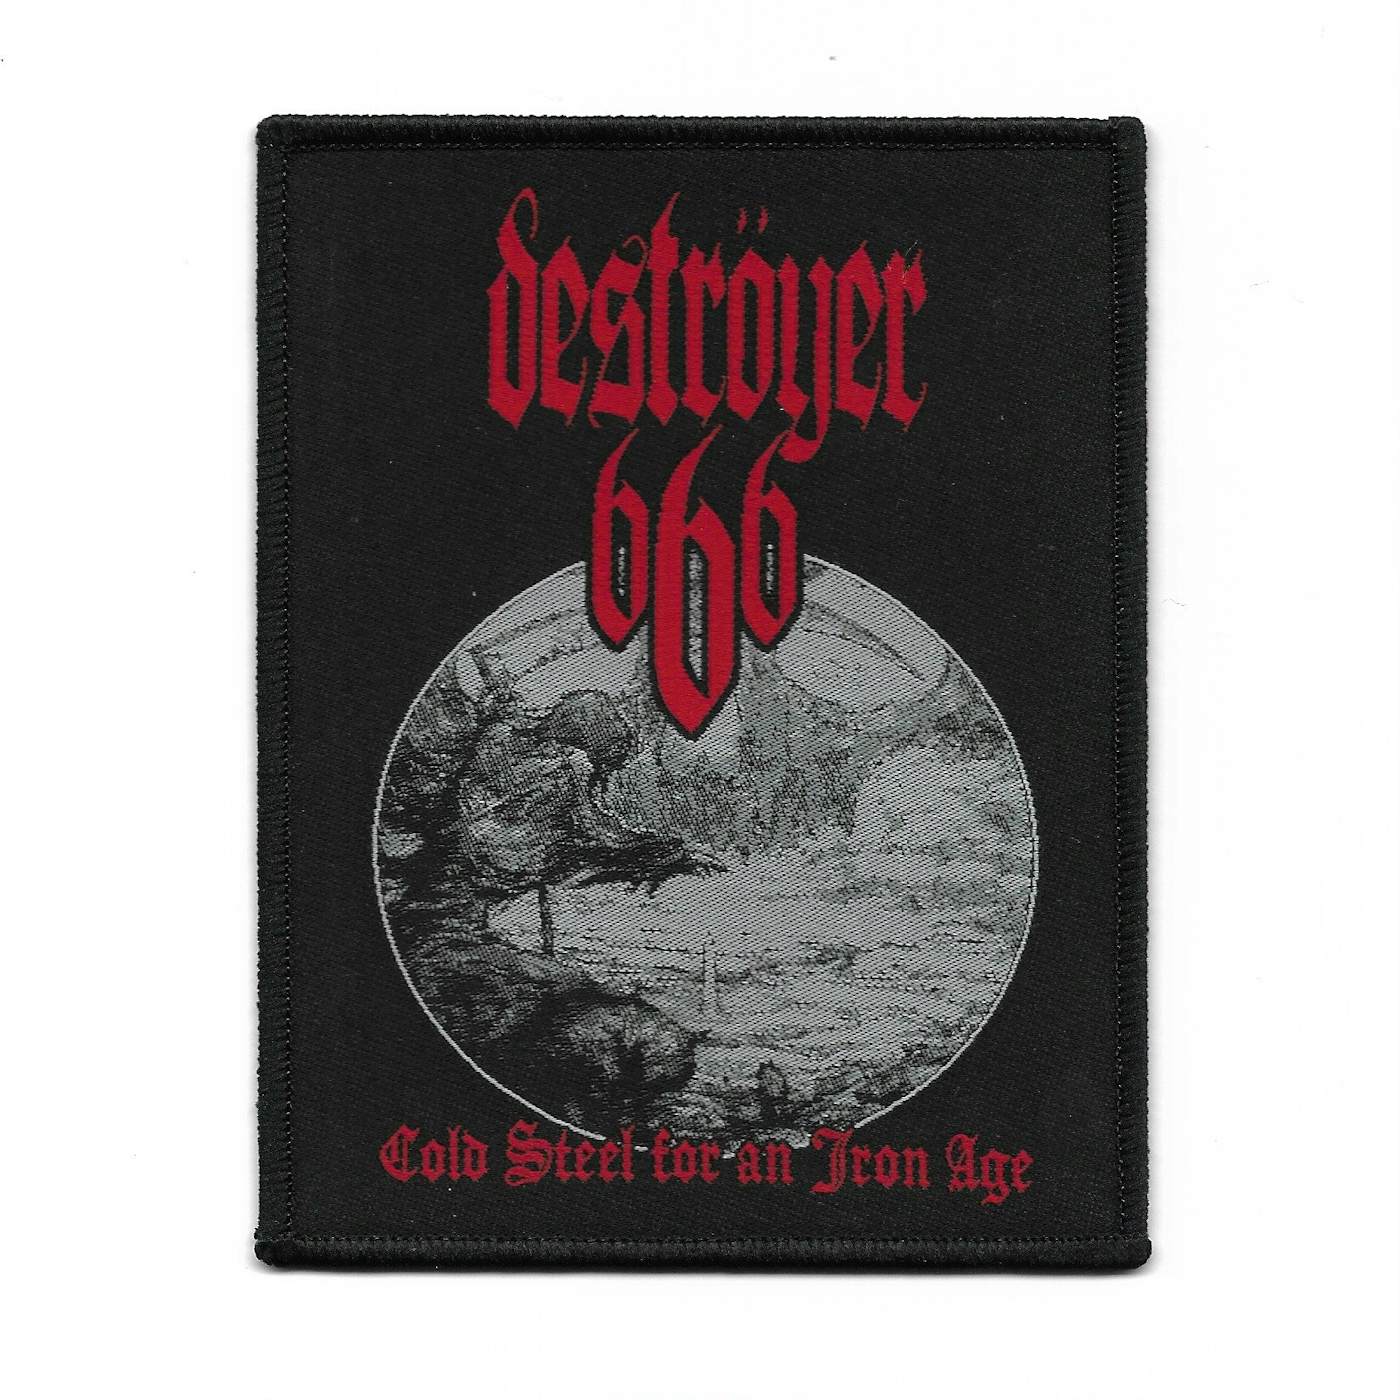 Deströyer 666 "Cold Steel for an Iron Age" Patch